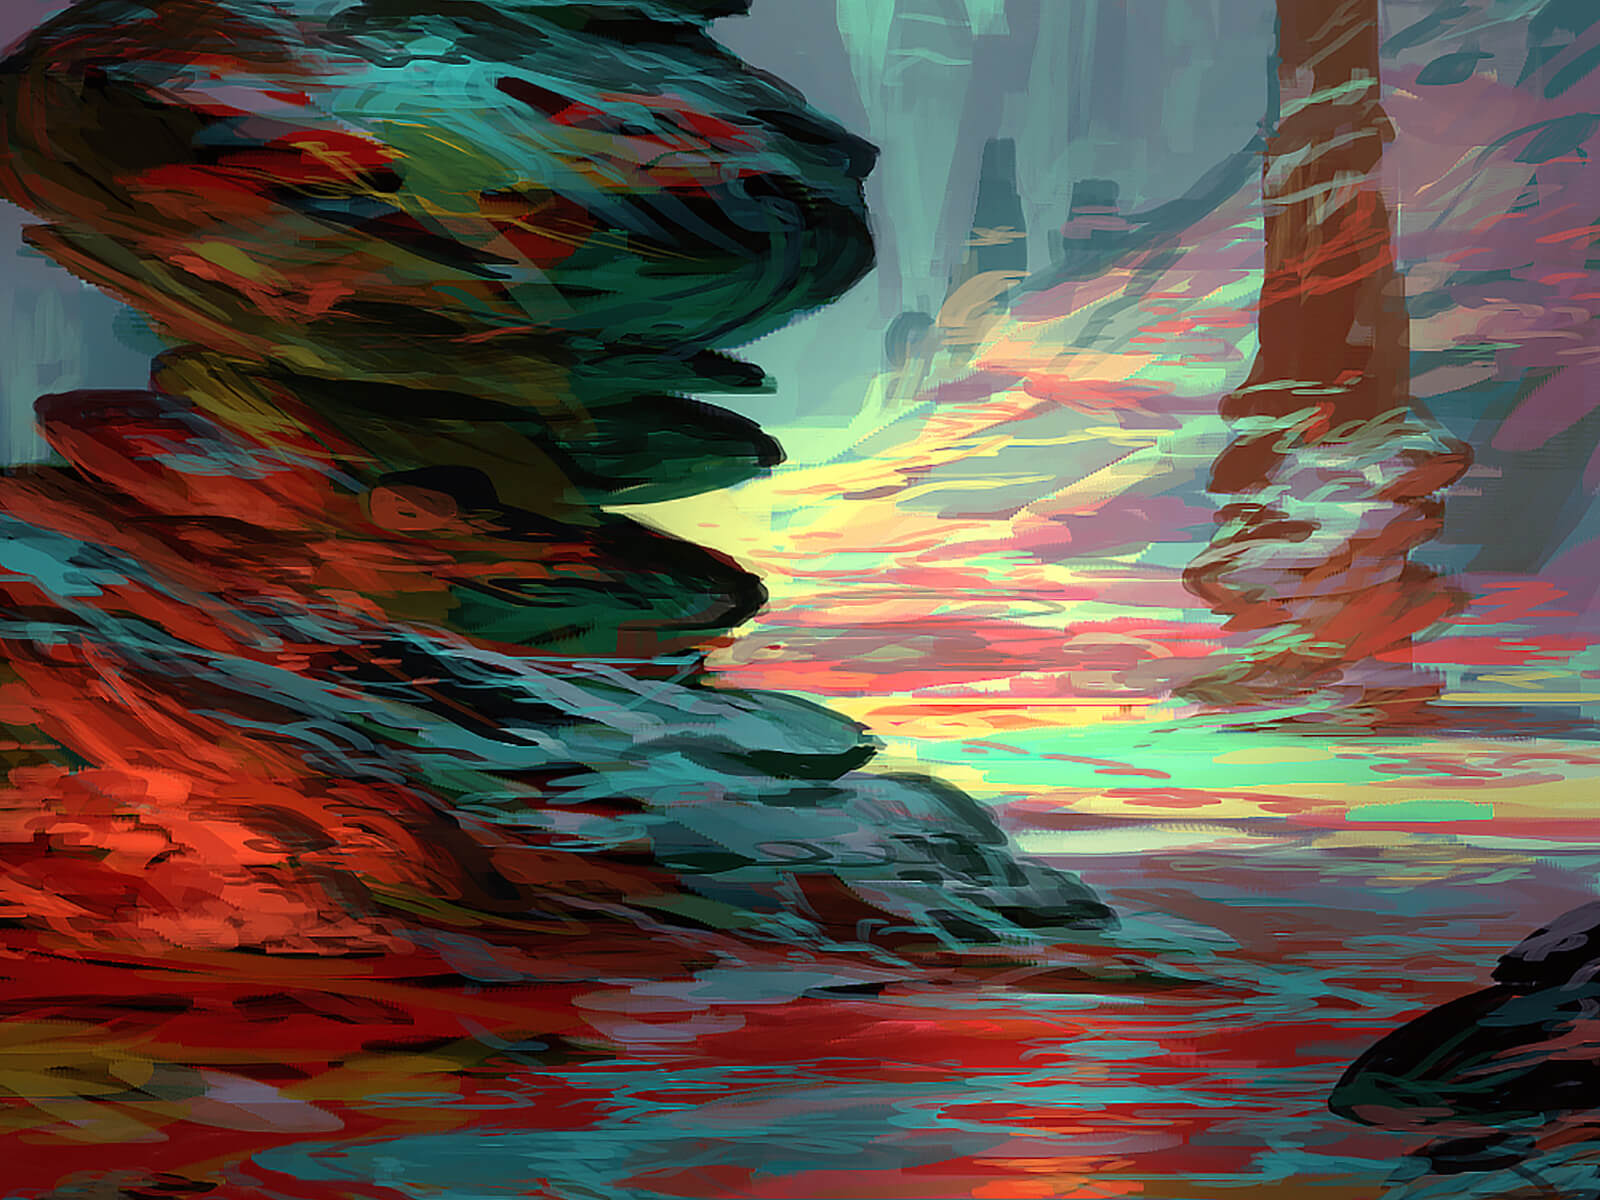 A rocky, alien environment with colorful outcroppings. A slender strip of stone hovers mysteriously above the landscape.